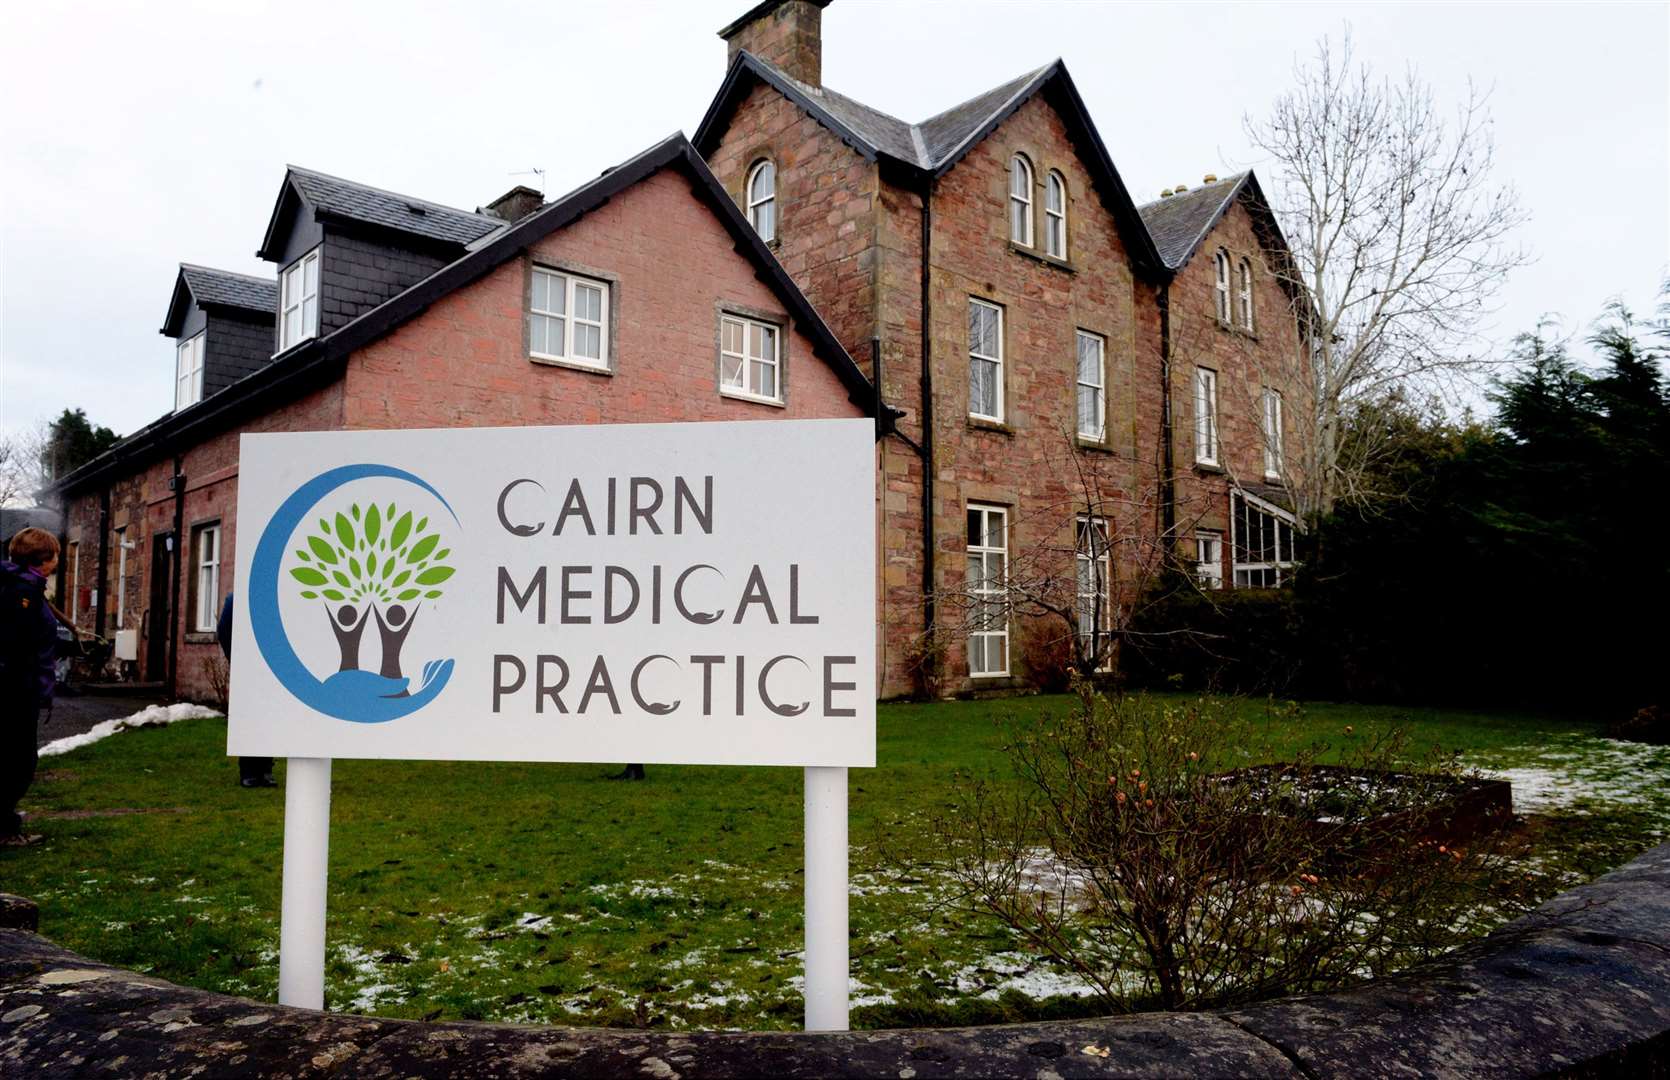 Cairn Medical Practice is delighted to be involved in the venture.